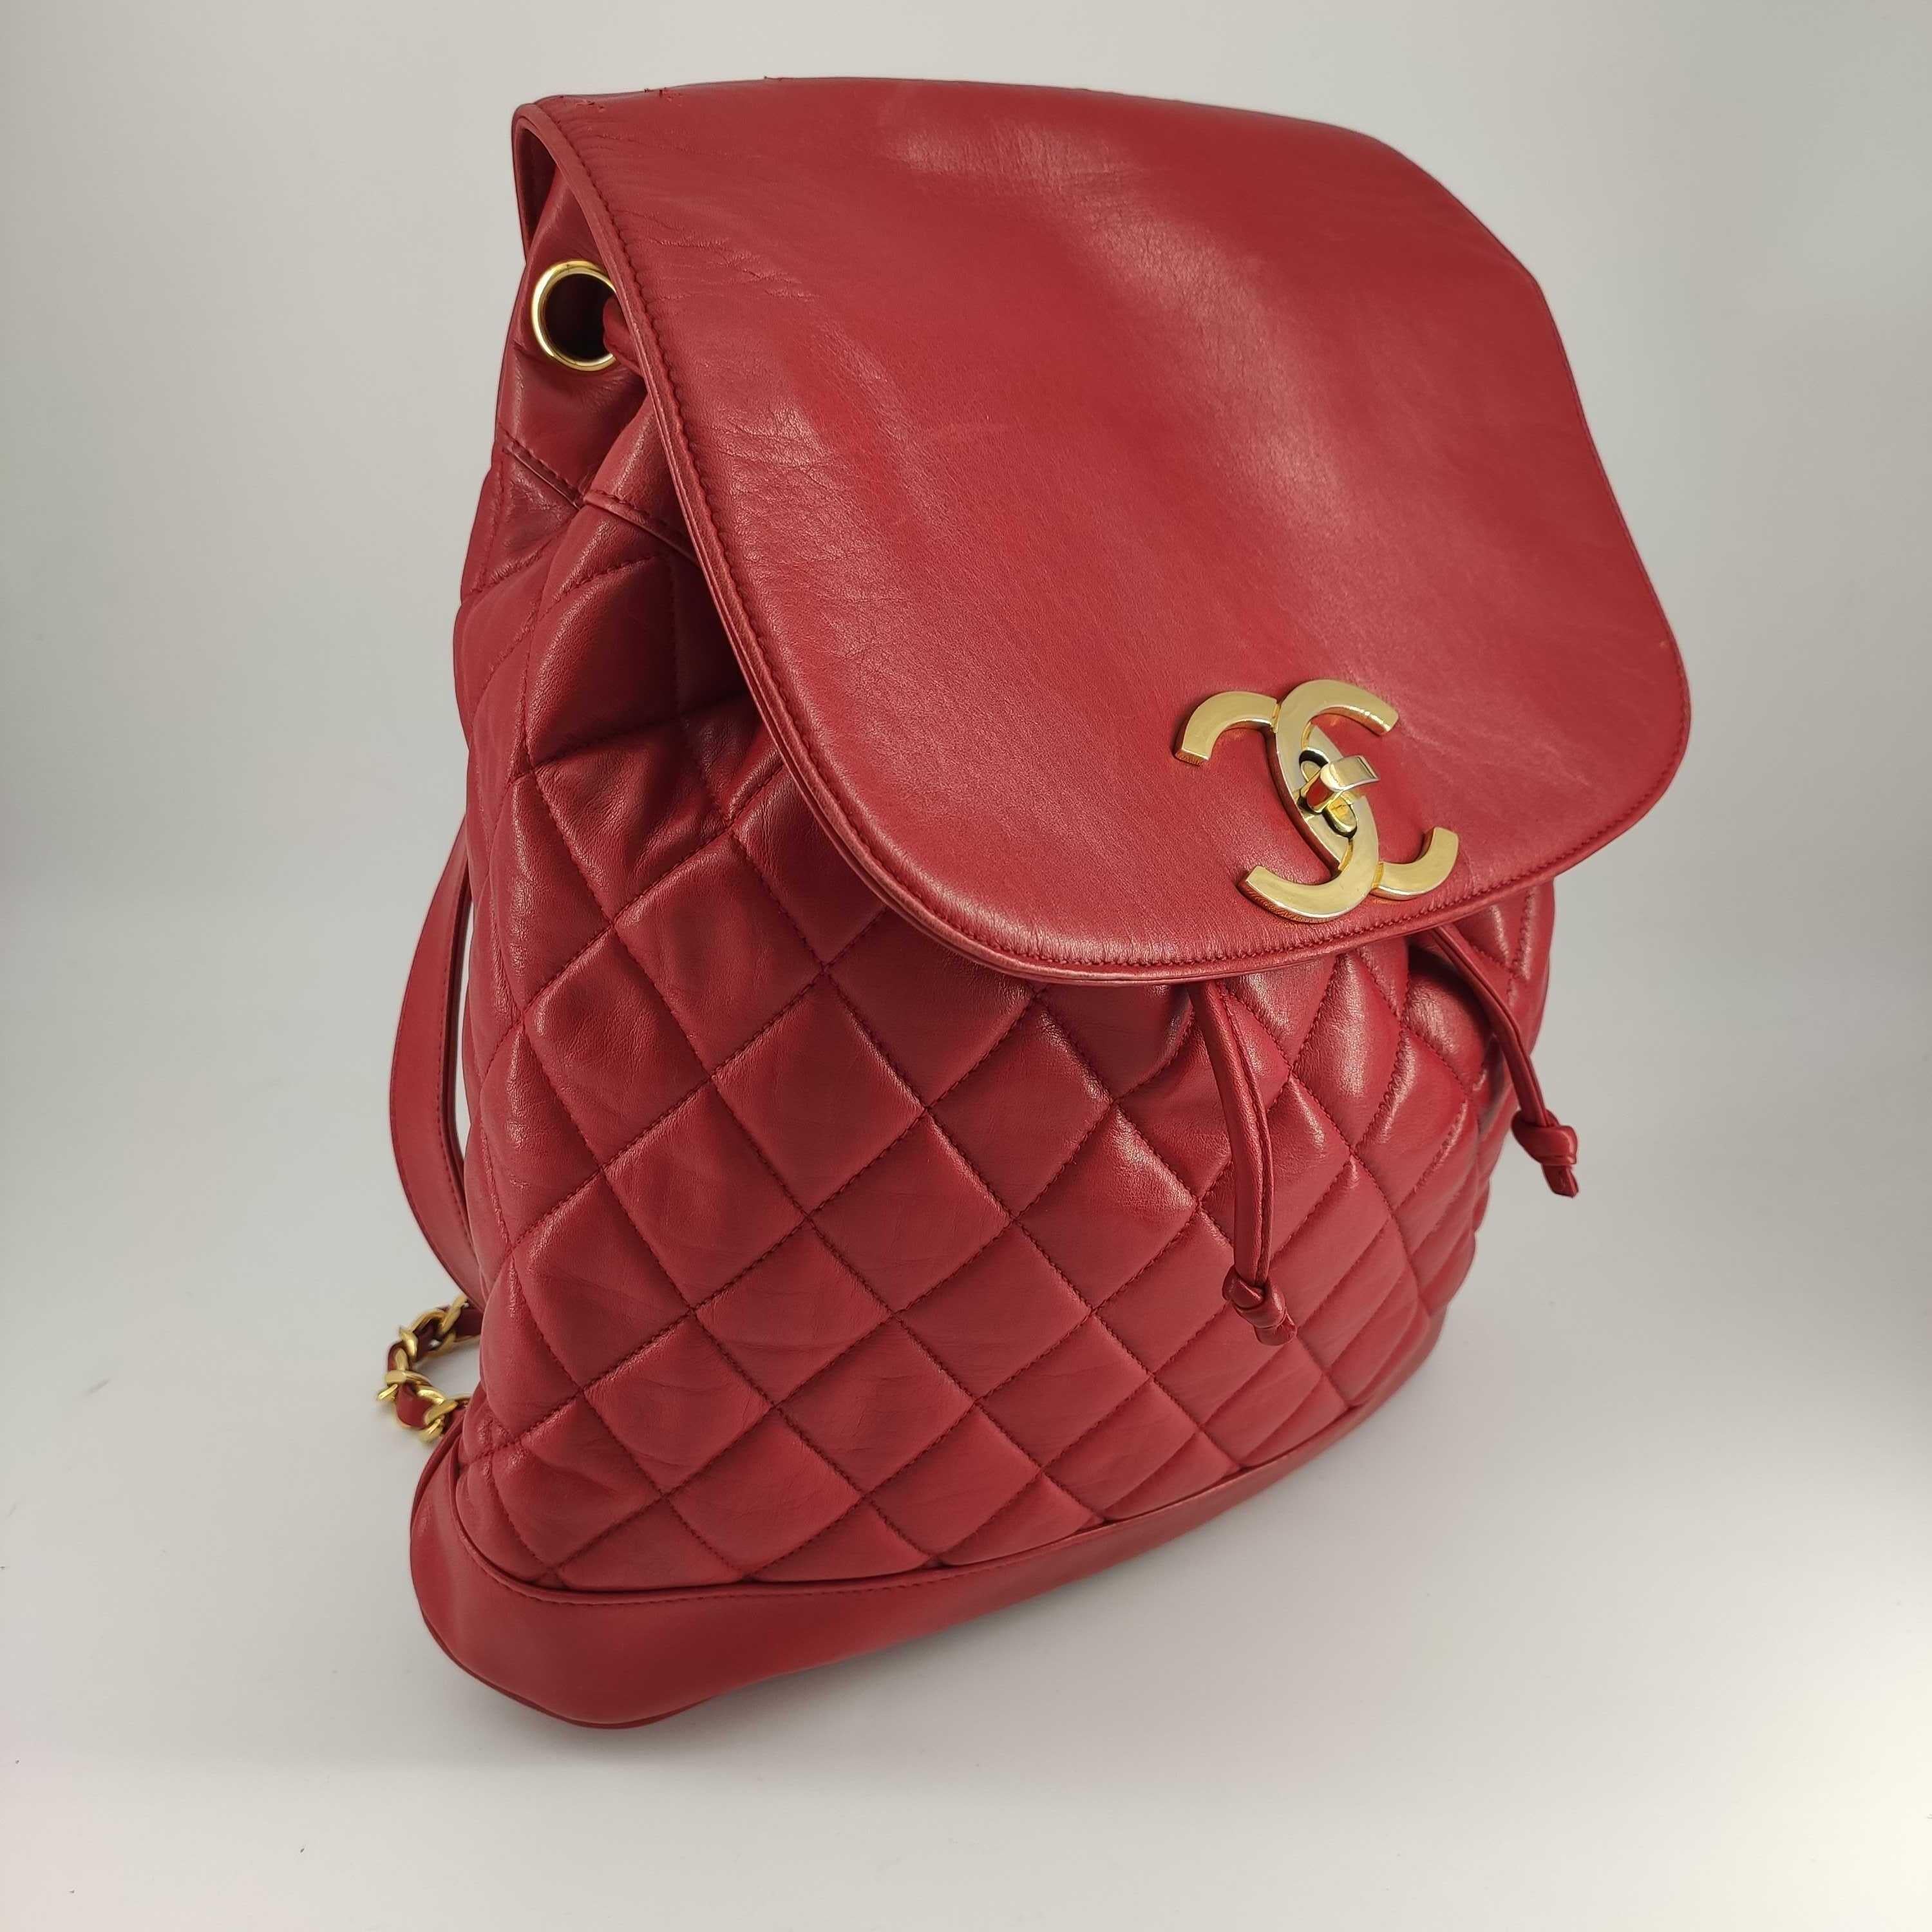 - Designer: CHANEL
- Condition: Good condition. Minor sign of wear on base corners, Minor scuff at the flap of the bag, Interior stains
- Accessories: None
- Measurements: Width: 30cm, Height: 26cm, Depth: 8cm
- Exterior Material: Leather
- Exterior